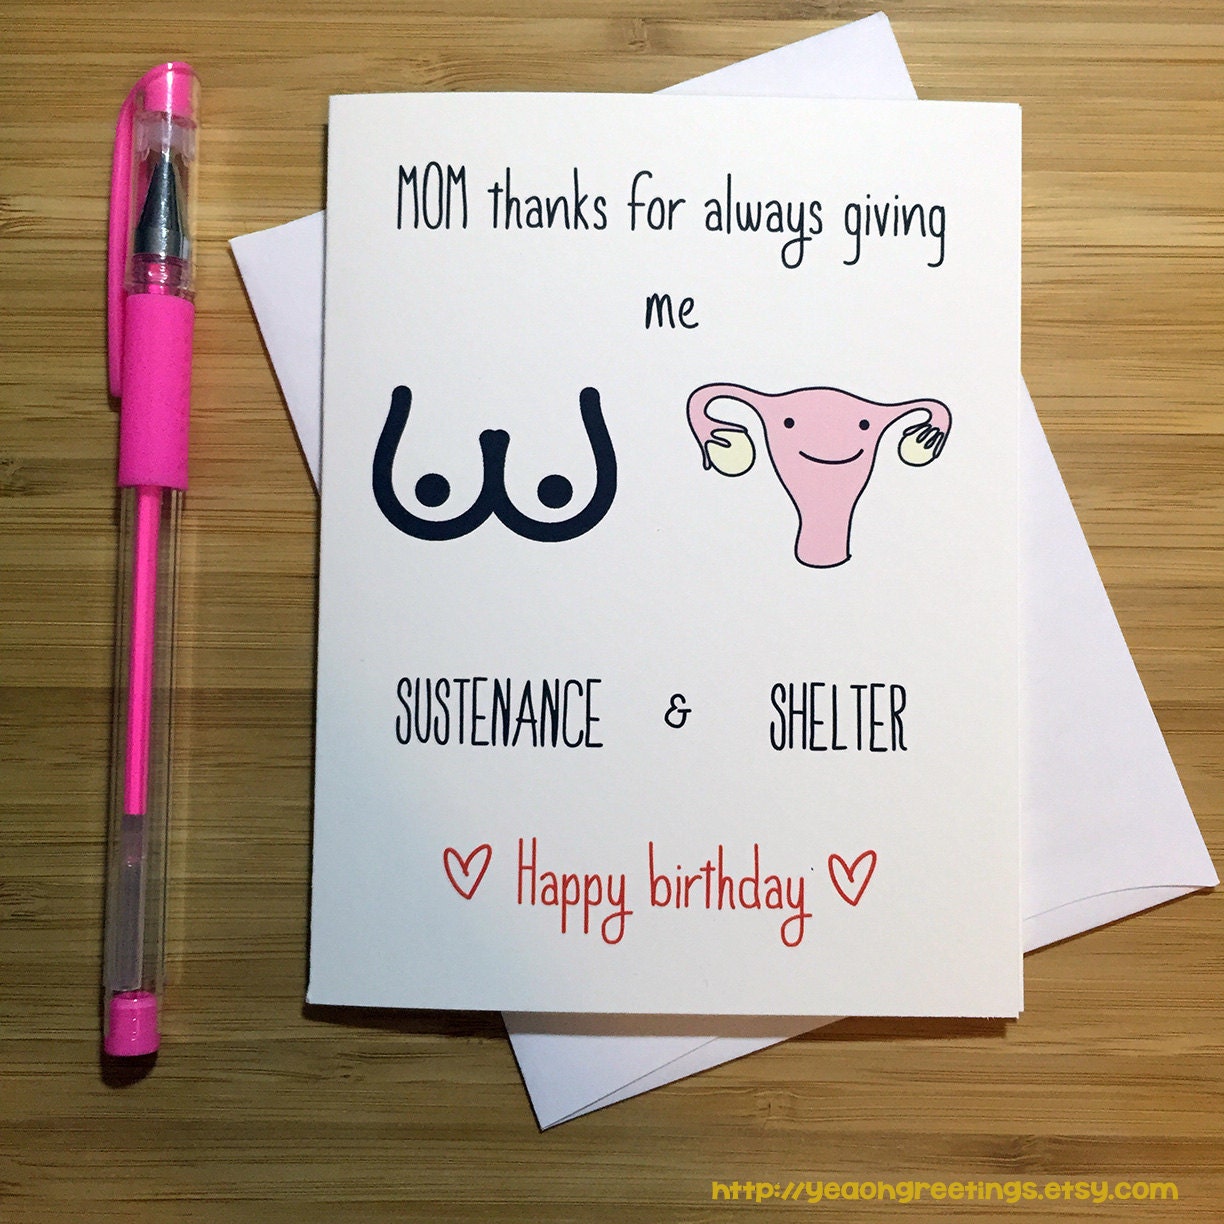 Funny Happy Birthday Cards For Mom Ideal Choose From Thousands Of Templates 